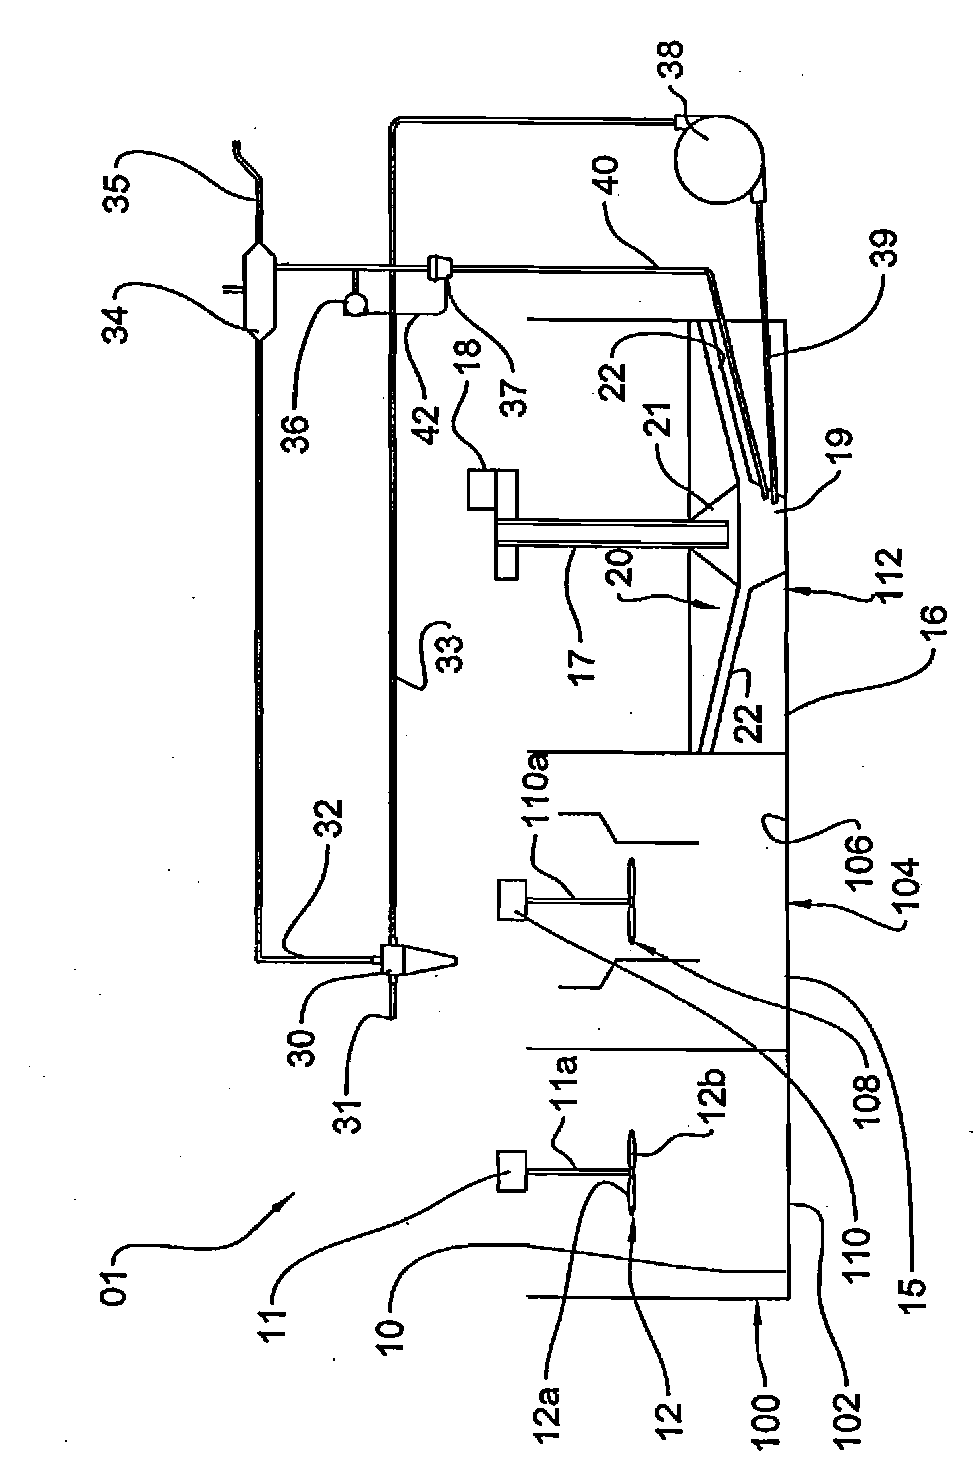 Ballast flocculation and sedimentation water treatment system with simplified sludge recirculation, and process therefor